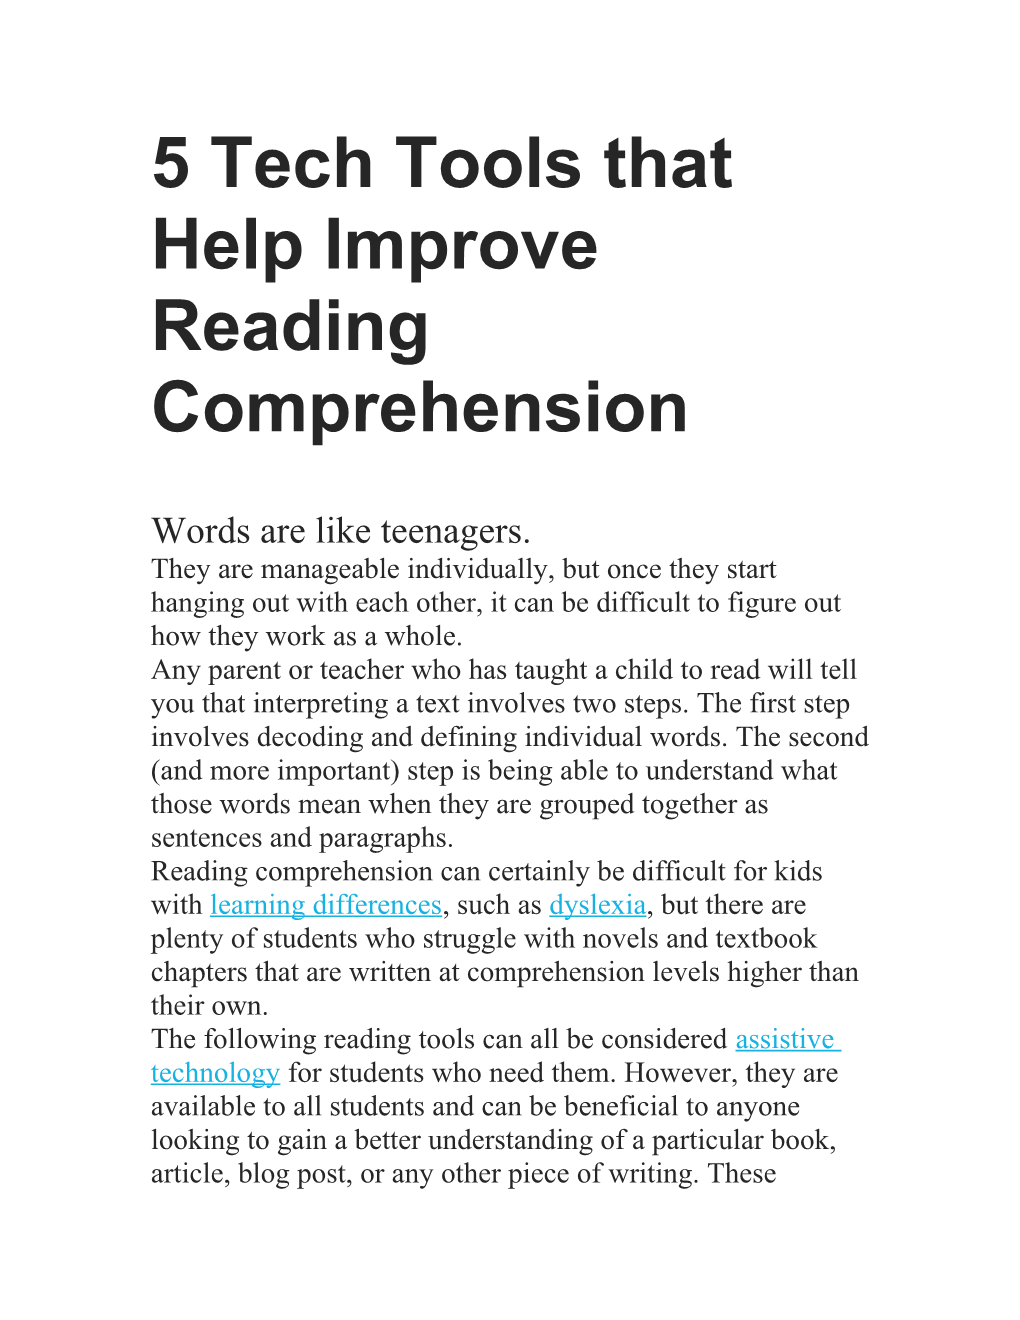 5 Tech Tools That Help Improve Reading Comprehension